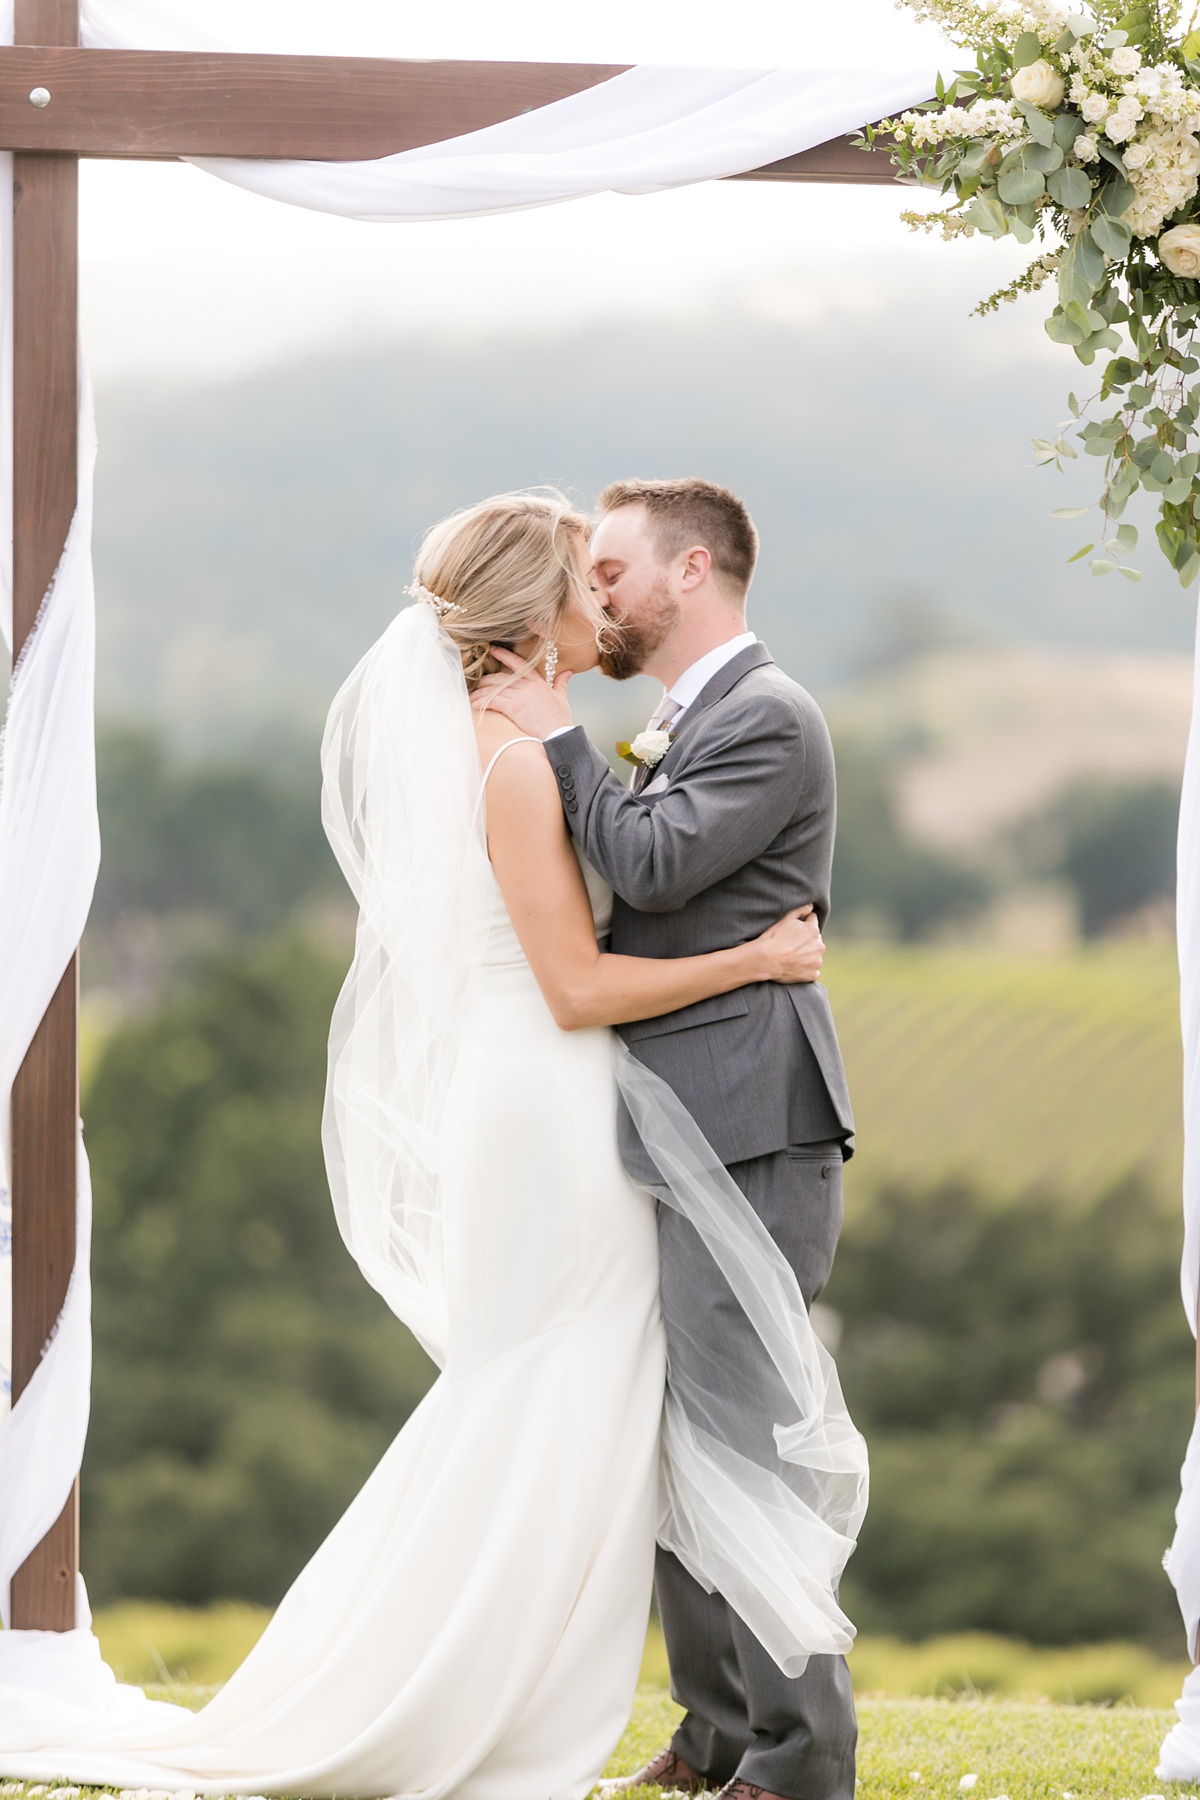 Bride and groom first kiss at Hilltop winery wedding in paso robles, ca